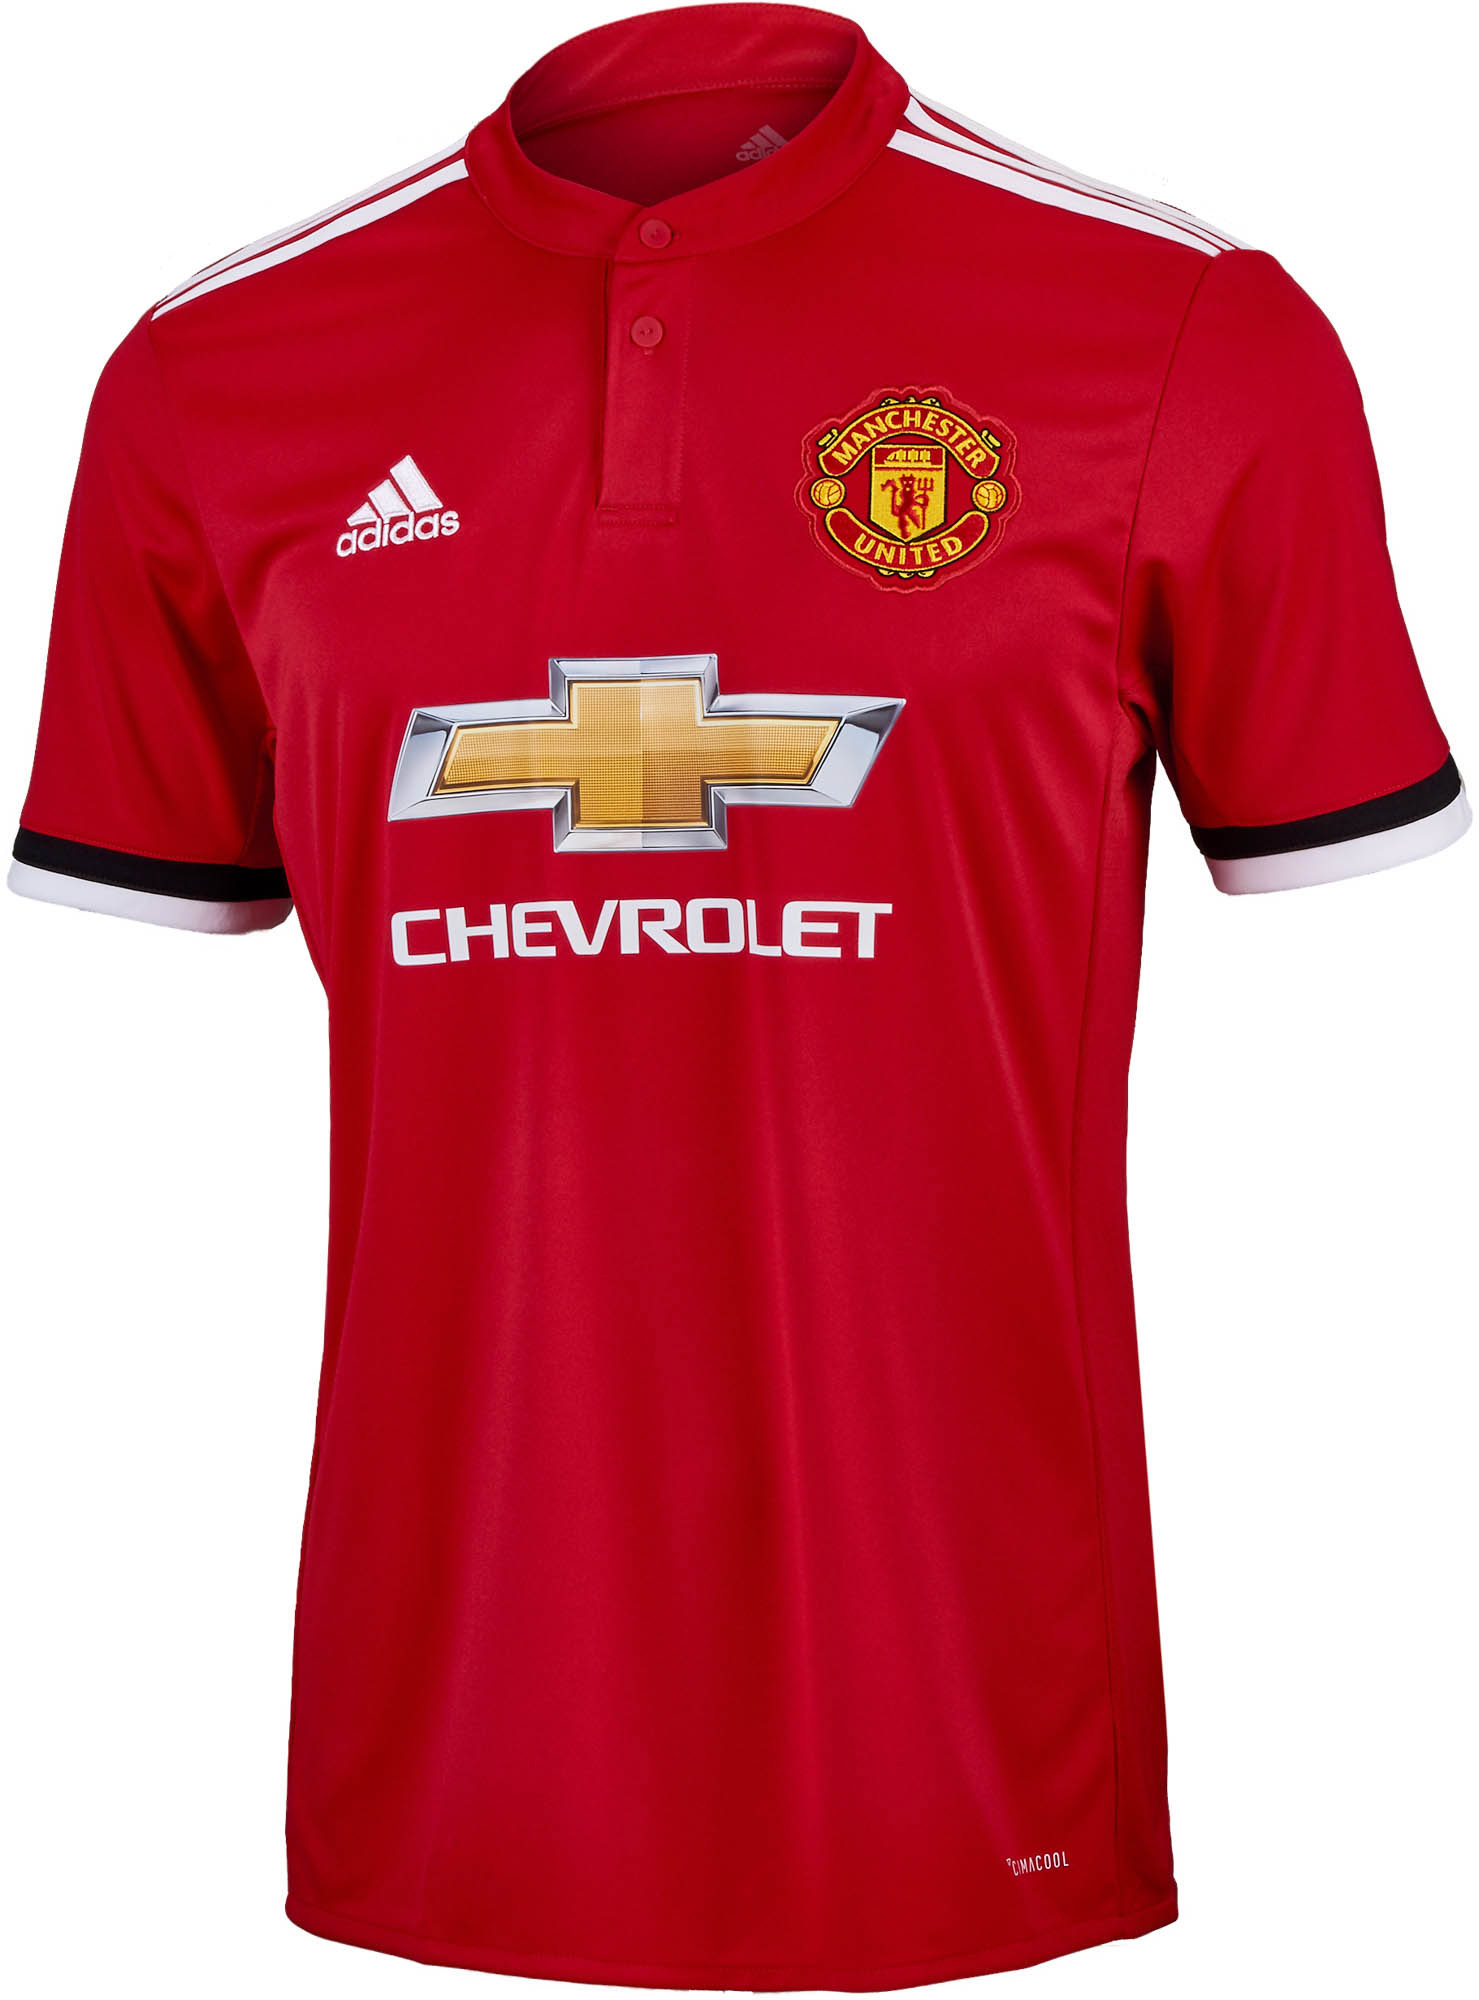 adidas Manchester United Jersey - 17/18 